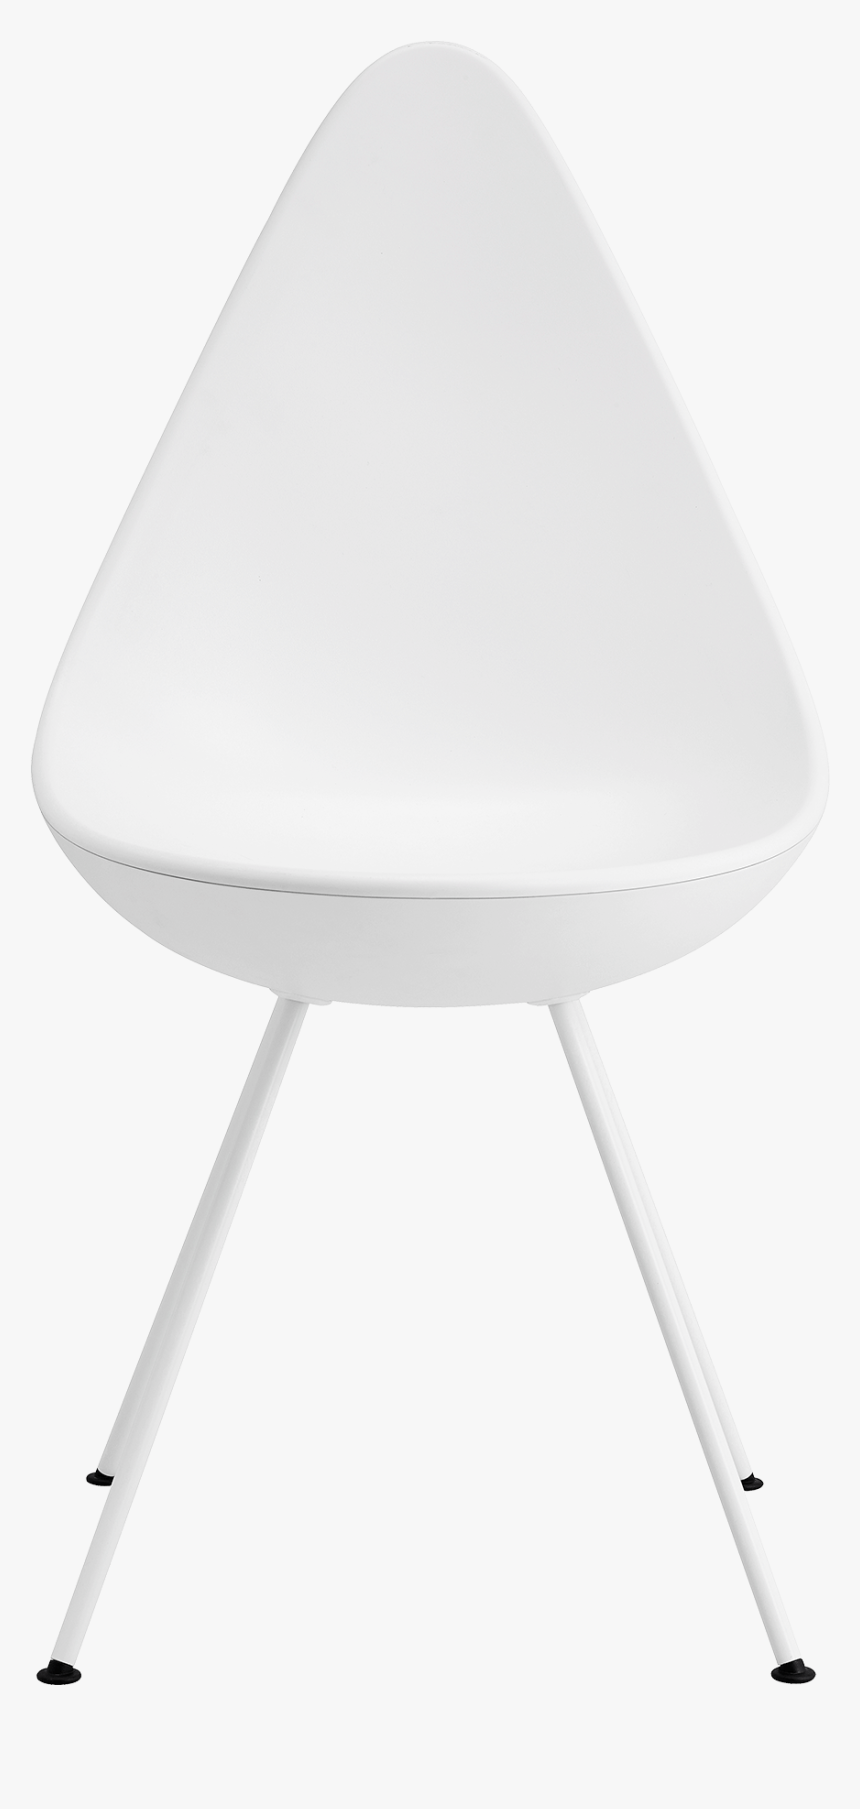 The Drop Chair Arne Jacobsen White Lacquered Base - Chair, HD Png Download, Free Download